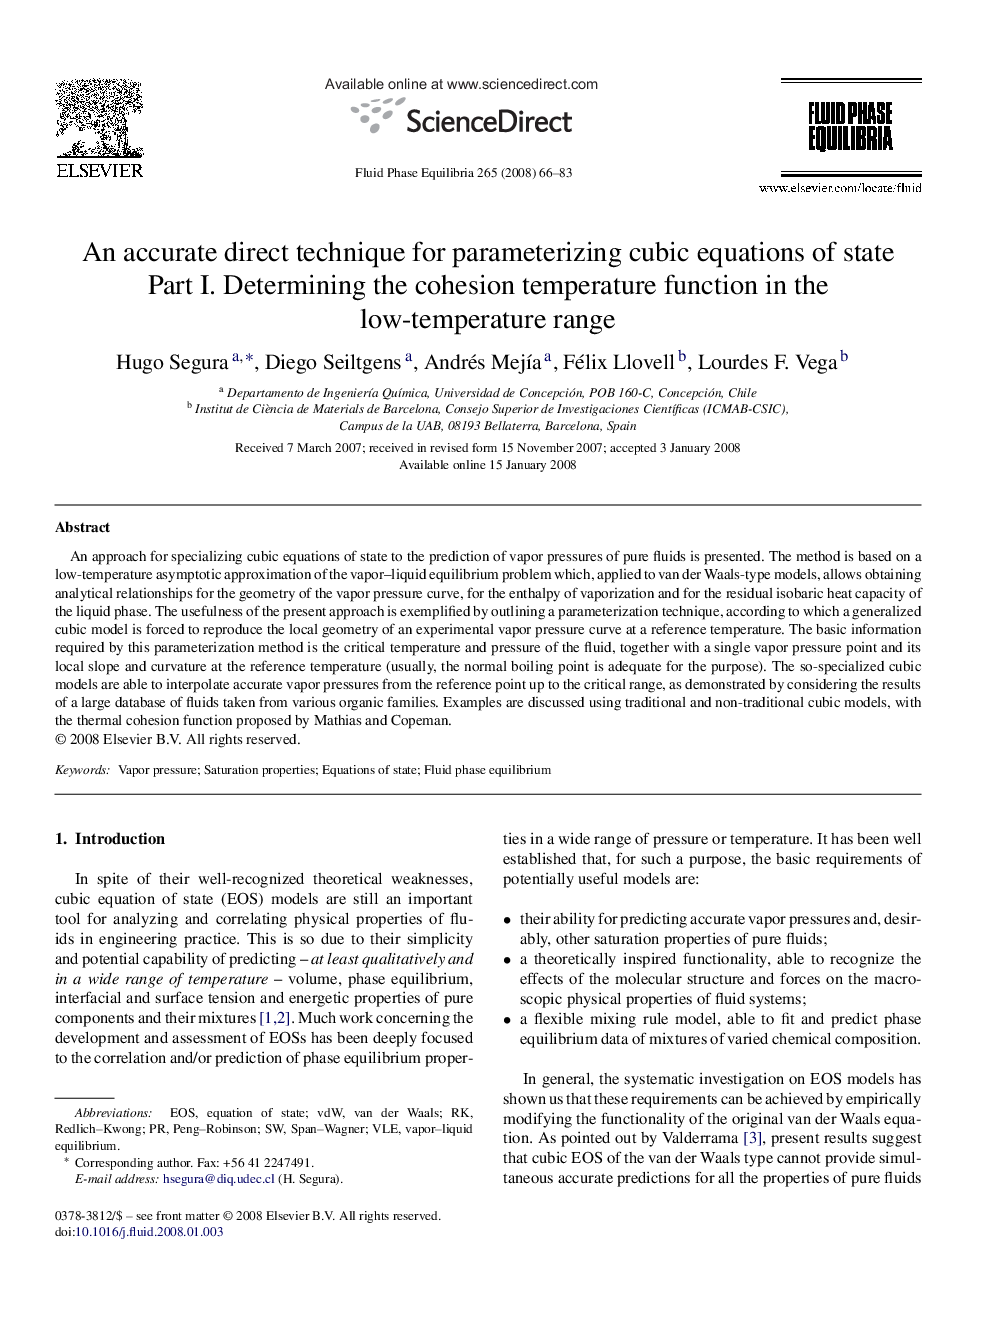 An accurate direct technique for parameterizing cubic equations of state: Part I. Determining the cohesion temperature function in the low-temperature range